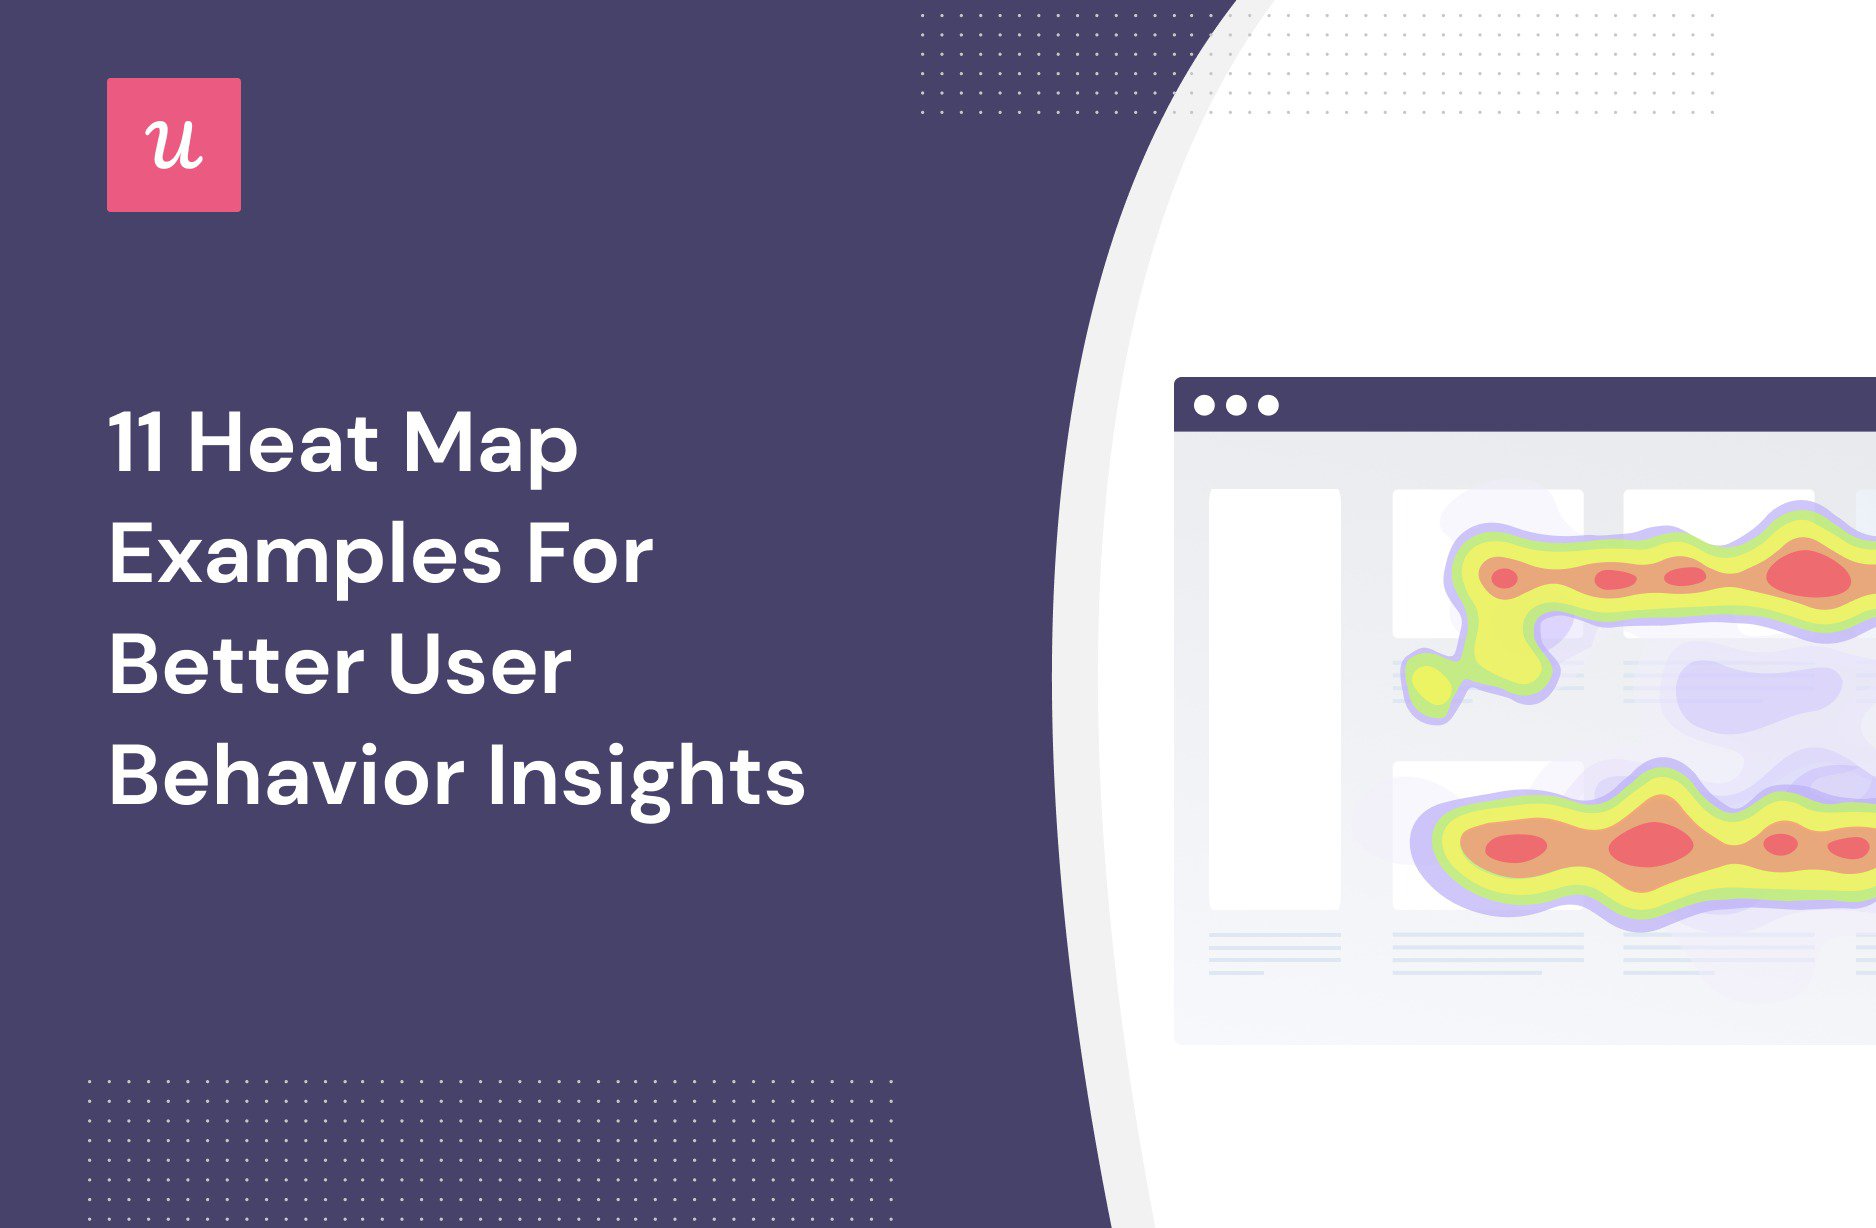 11 Heat Map Examples For Better User Behavior Insights cover